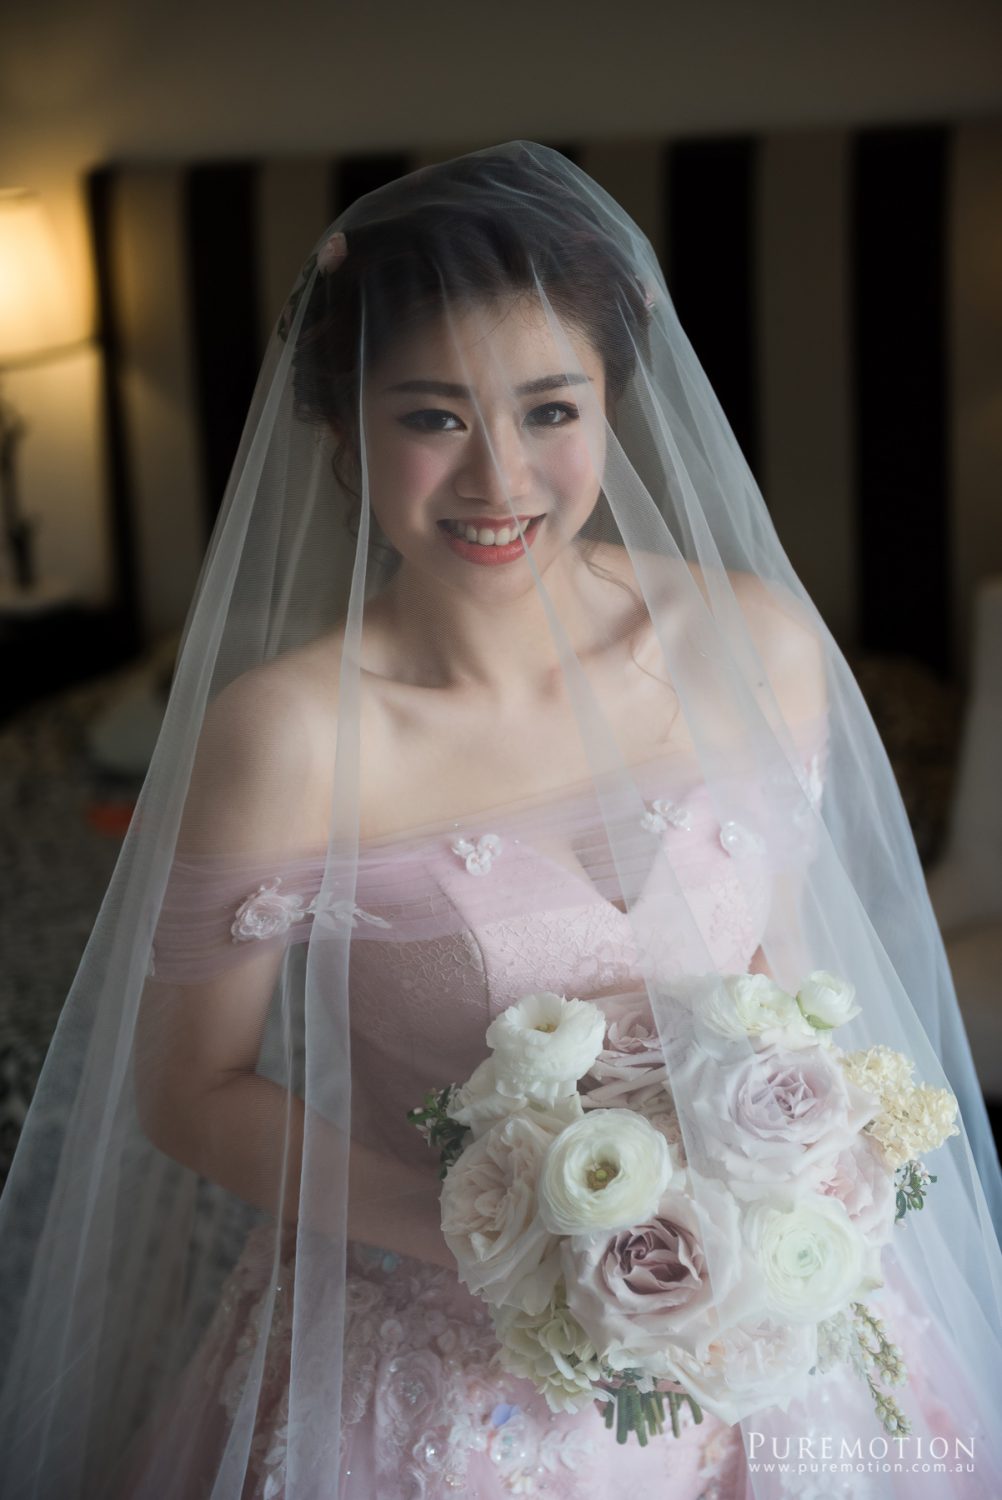 181018 Puremotion Wedding Photography Alex Huang Spicers Clovelly TiffanyKevin-0070